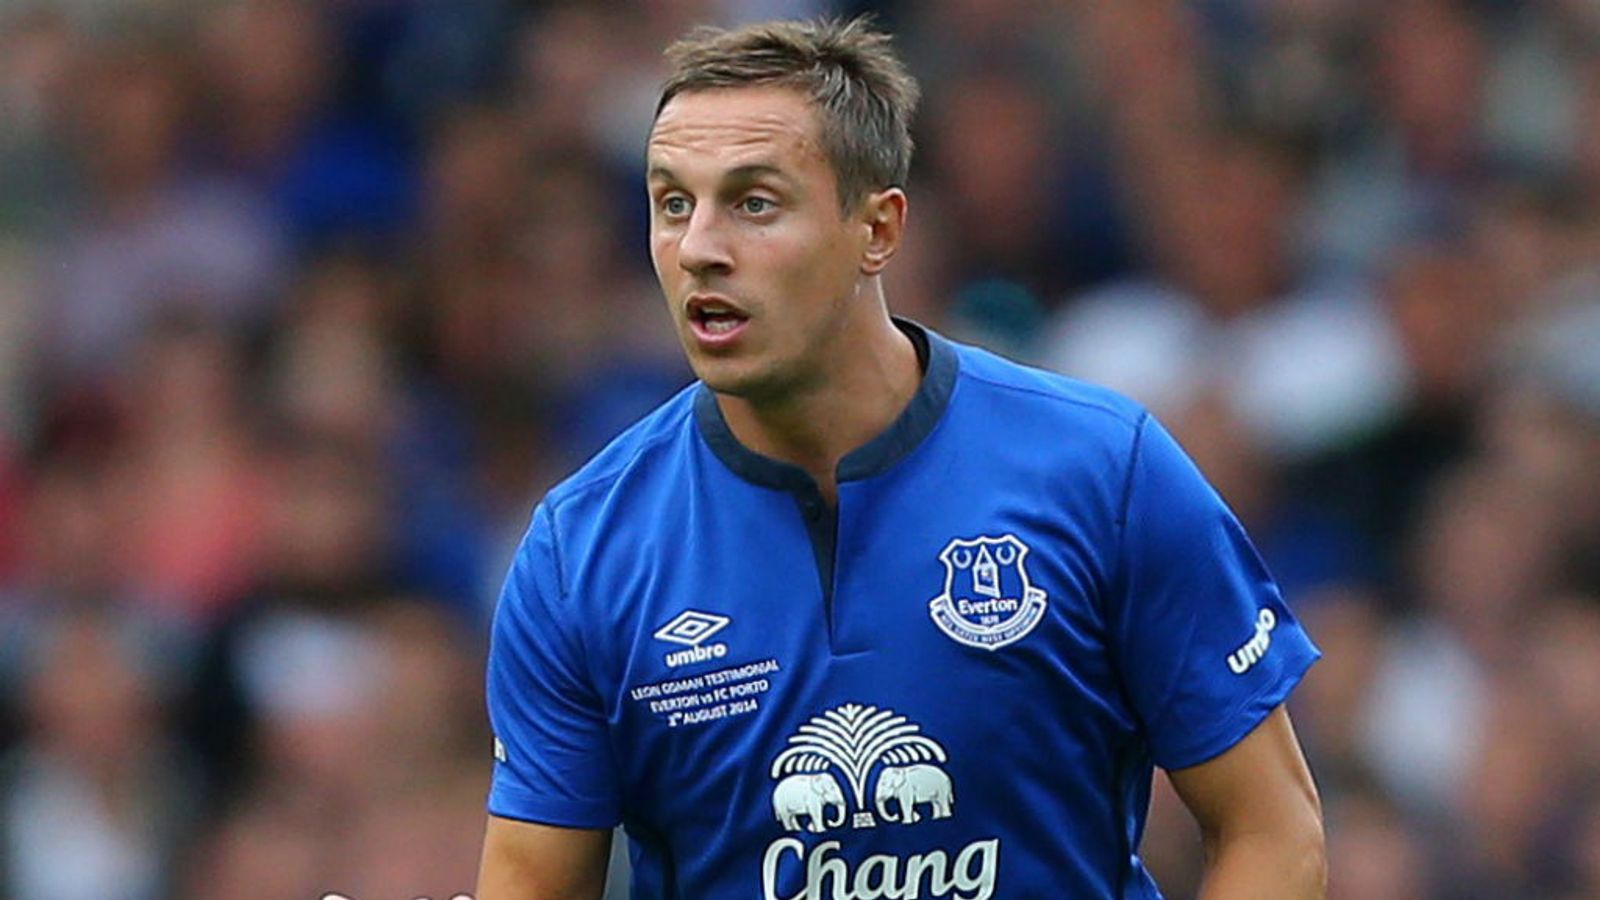 Ex-England and Everton defender Phil Jagielka retires from football aged 41